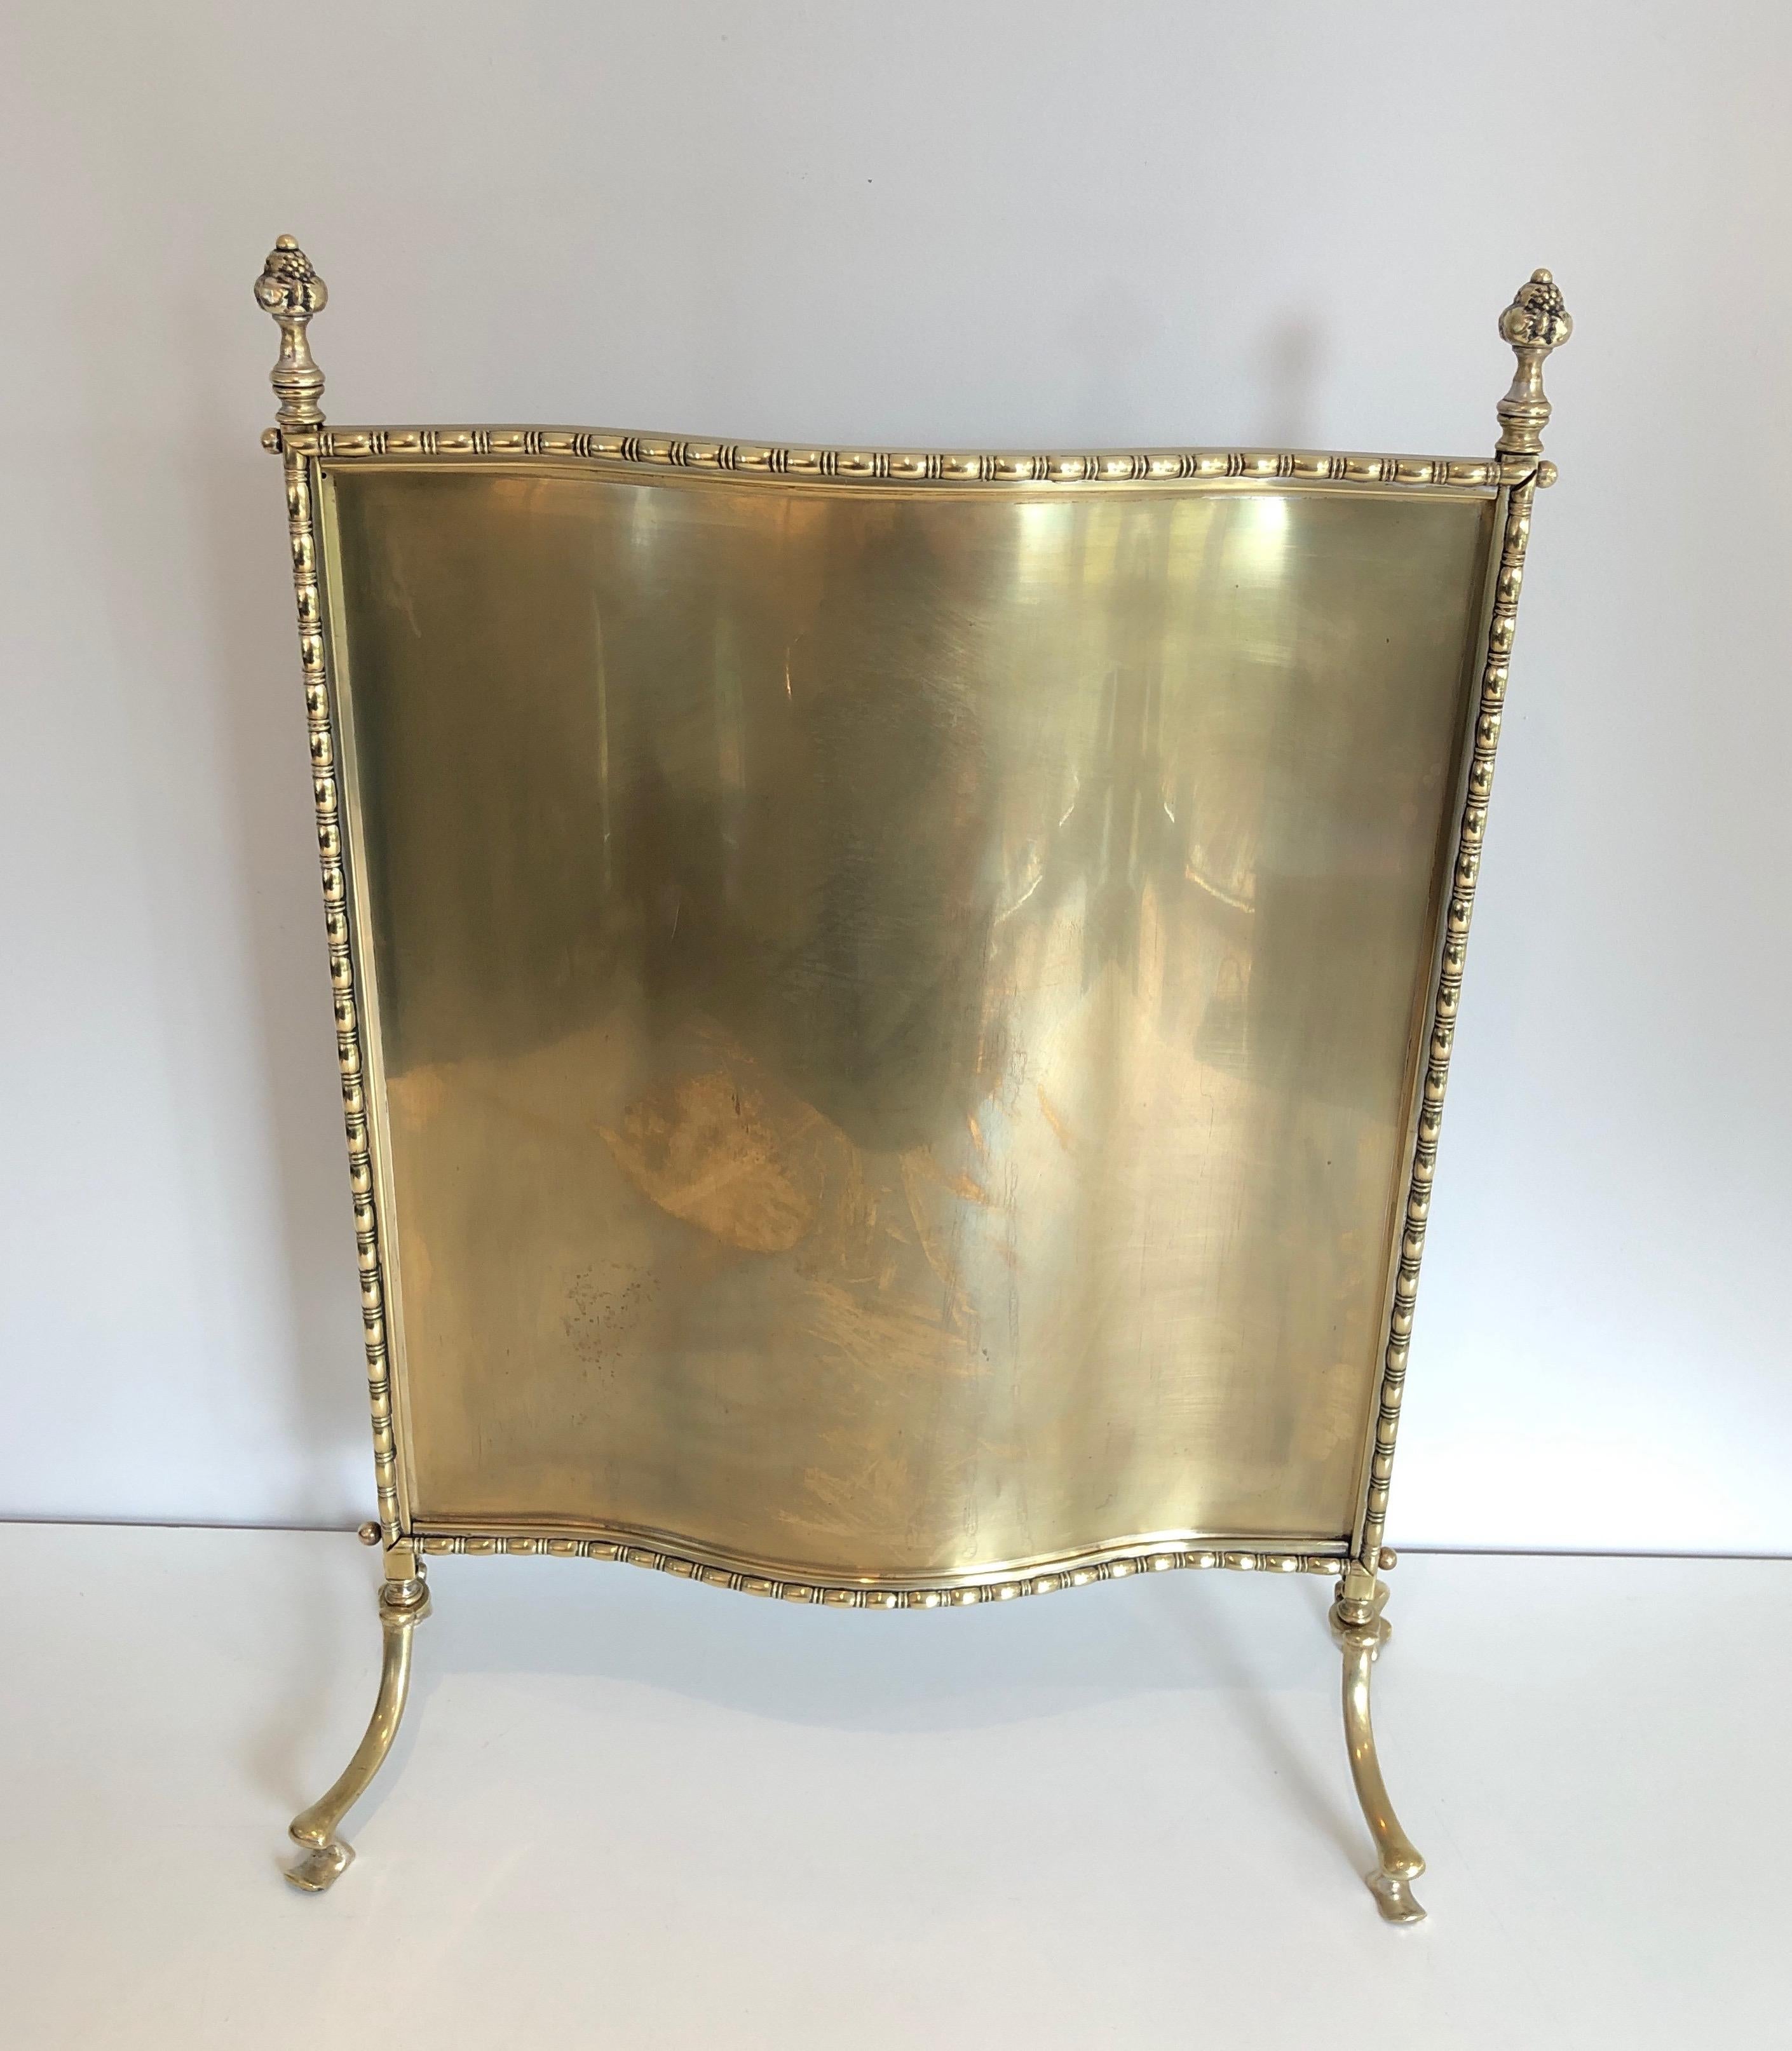 This very nice and rare neoclassical style fire place screen is made of bronze, steel and brass with faux bamboo decor and finials. This is a very nice work by famous French designer Maison Bagués, circa 1940.